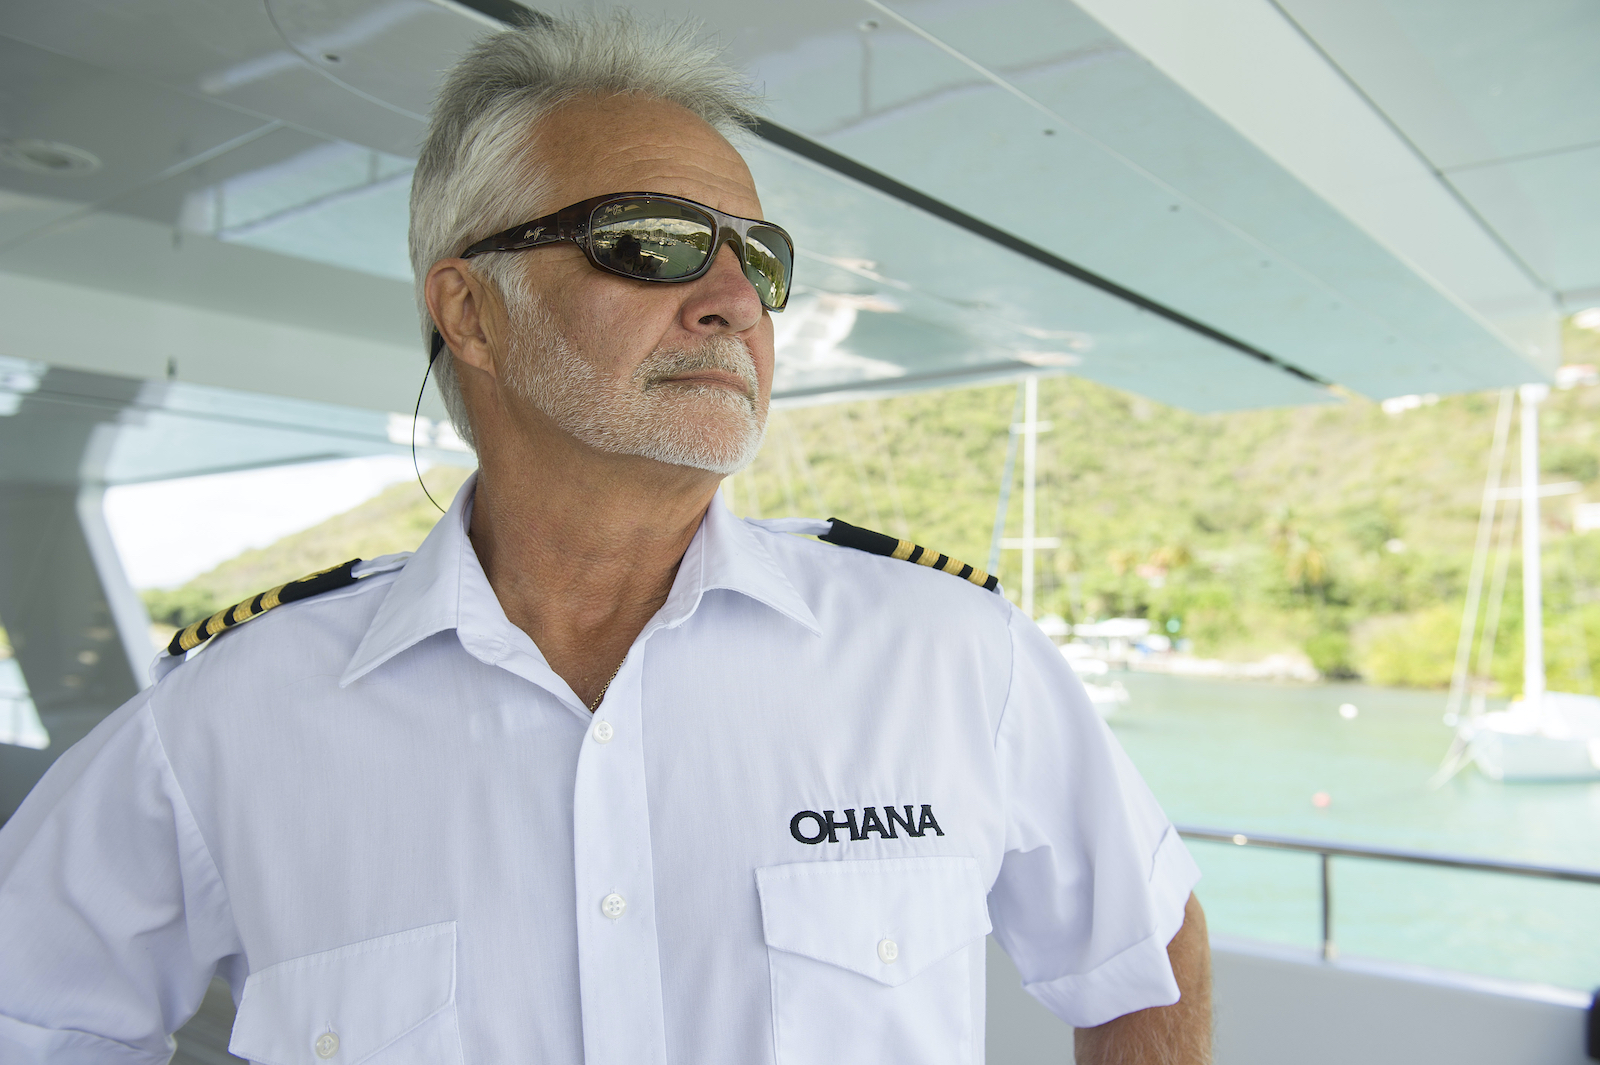 Captain Lee Reveals the Surprising Reason Why ‘Below Deck’ Season 1 Was Re-Edited and Delayed